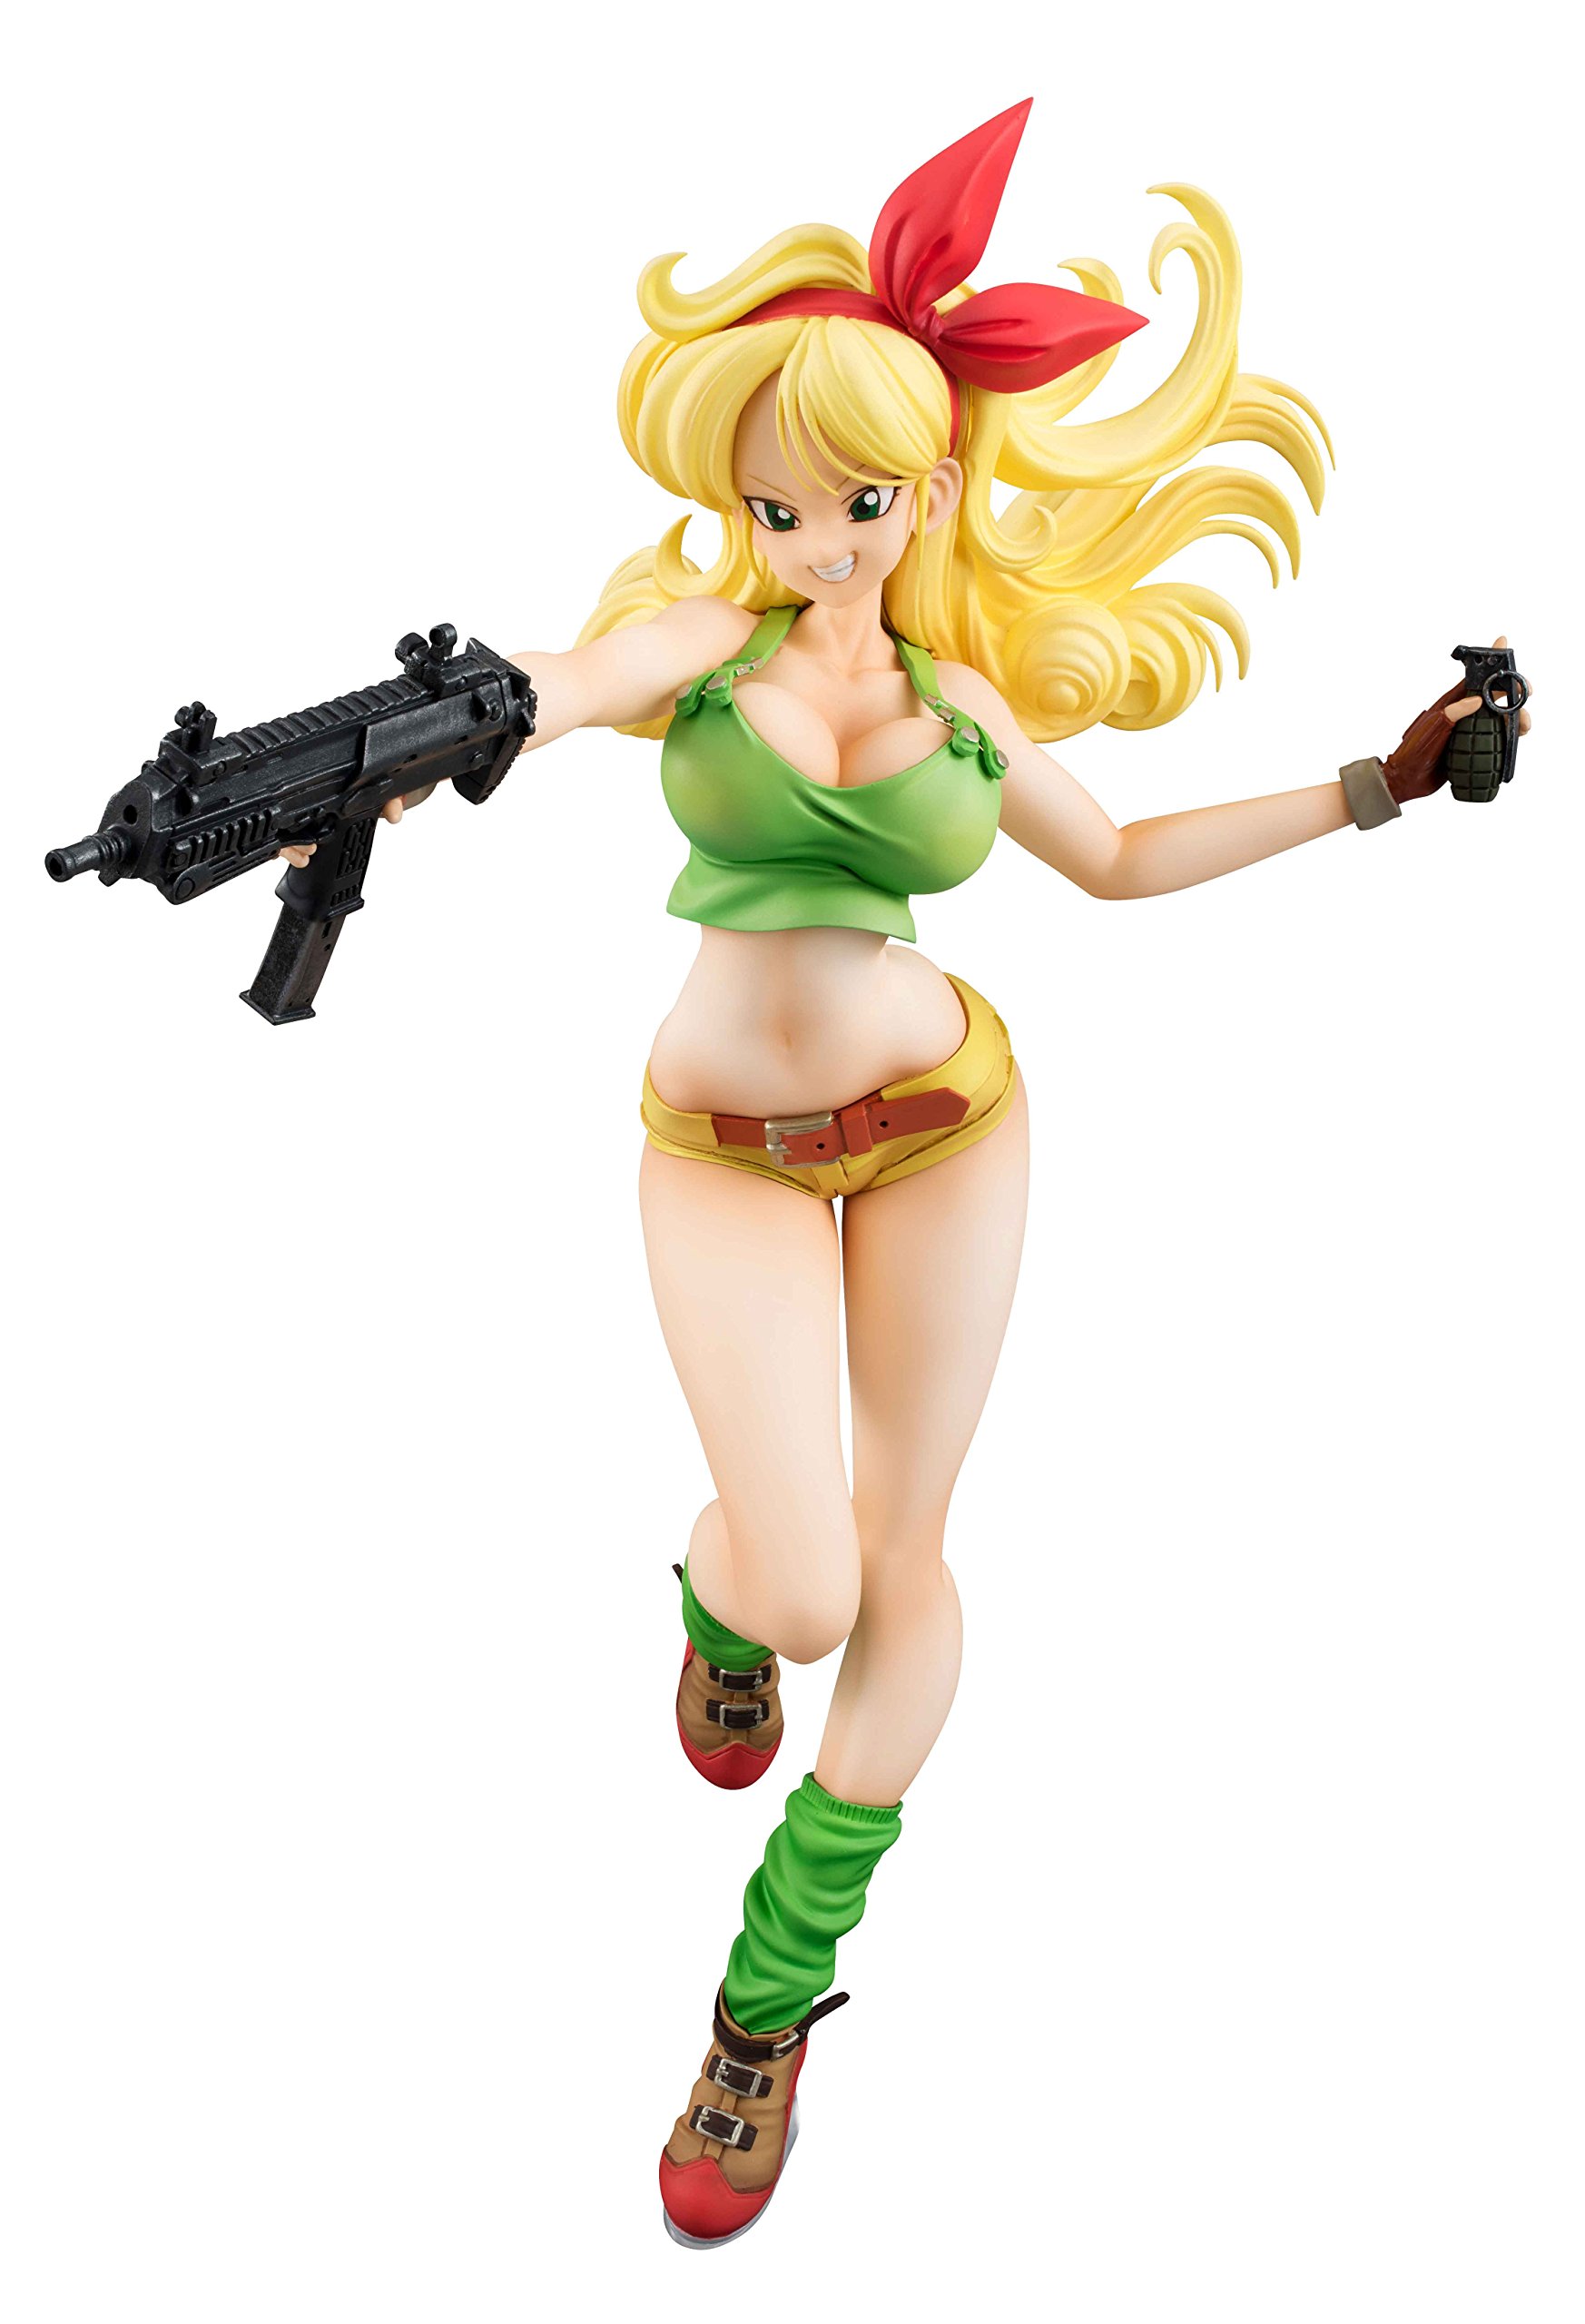 Dragon Ball Gals DBZ Lunchi Figure Blond Hair Ver Megahouse Model Toy in Box